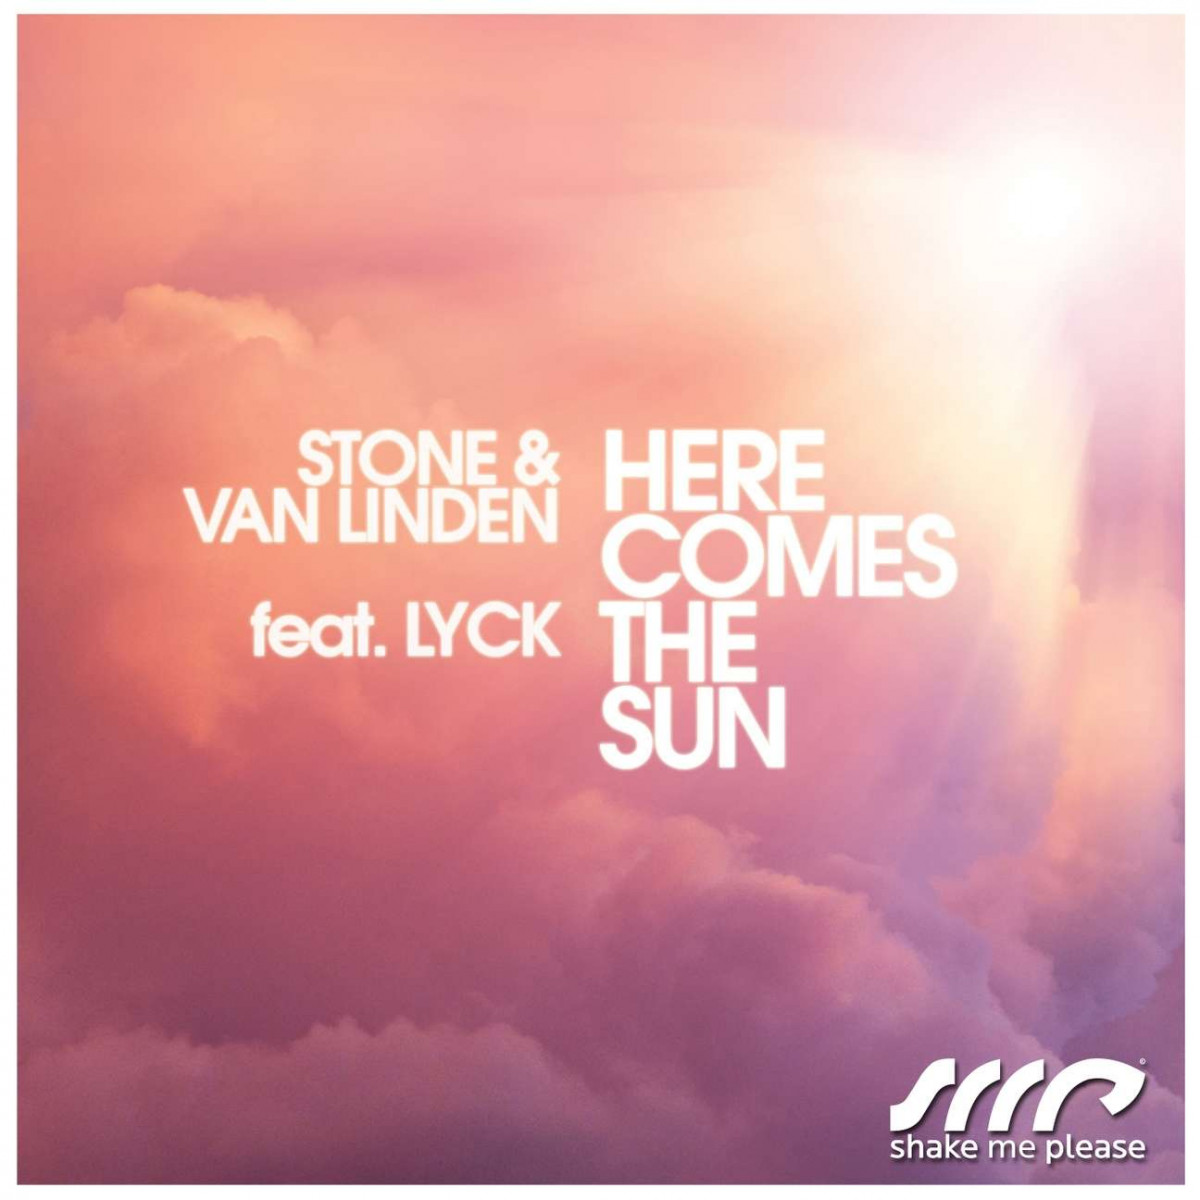 CJ Stone & Marc Van Linden feat. Lyck - Here Comes the Sun (Radio Mix) (2013)